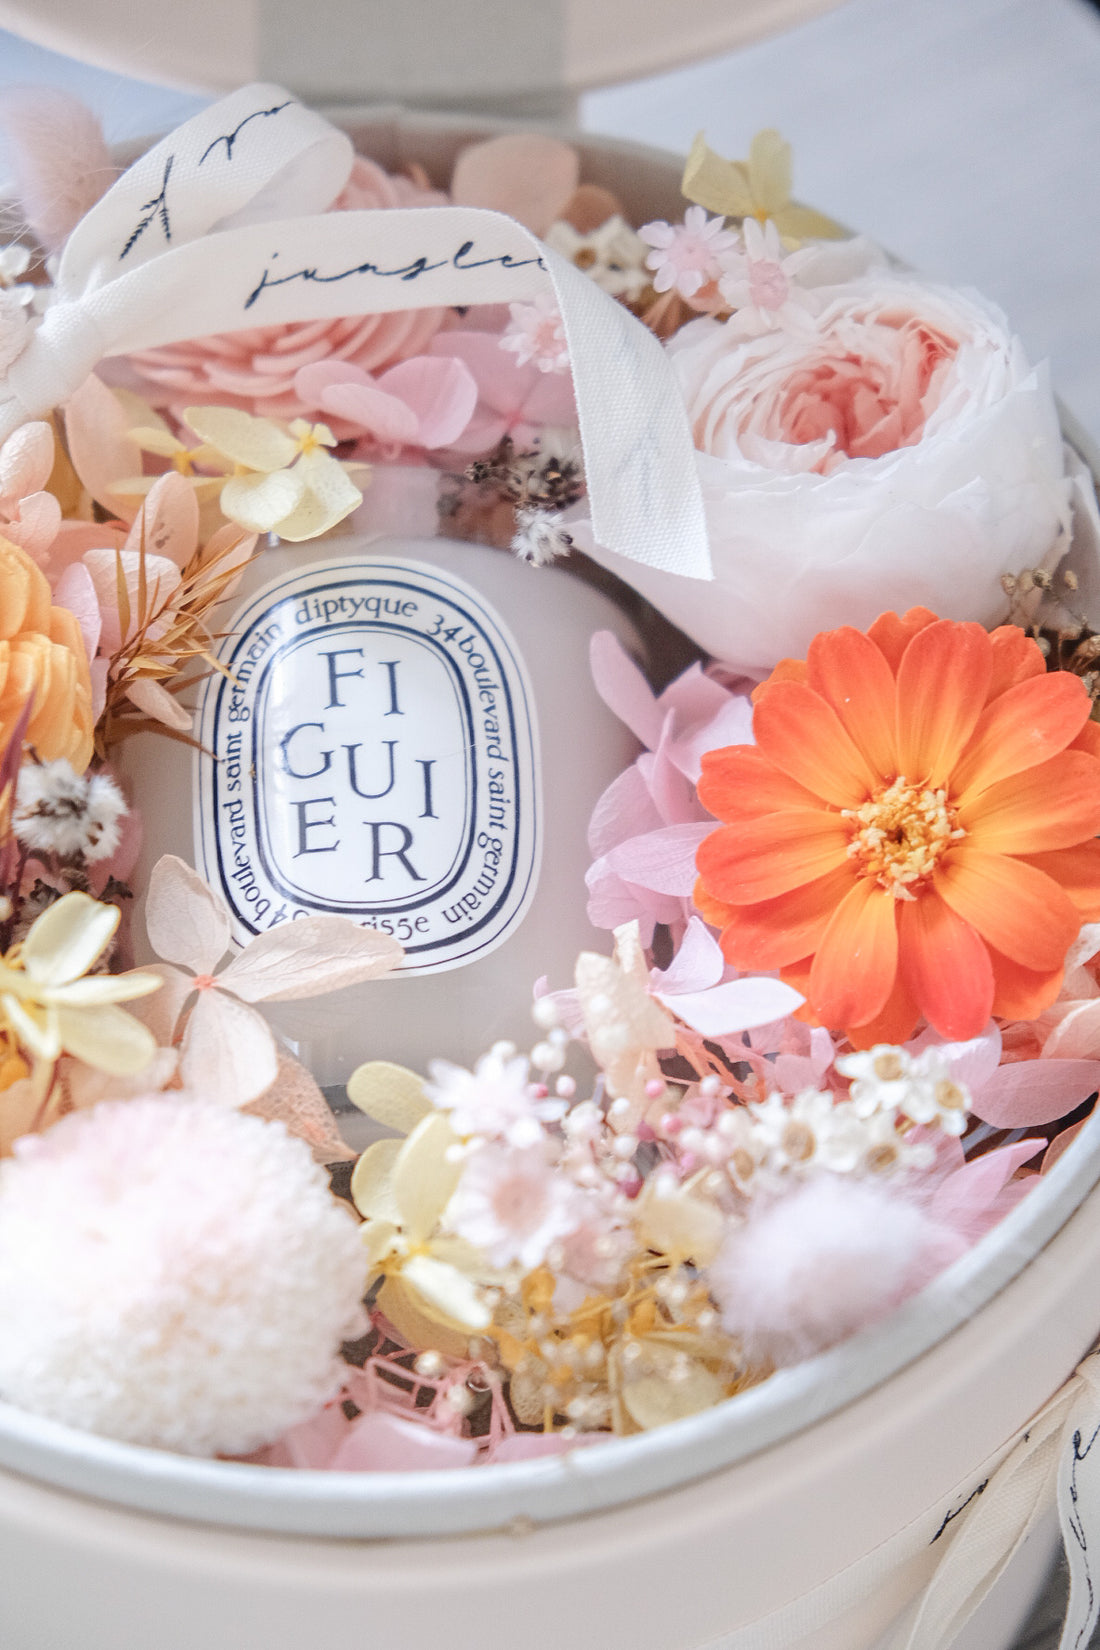 Preserved Flower Box wth Diptyque candle